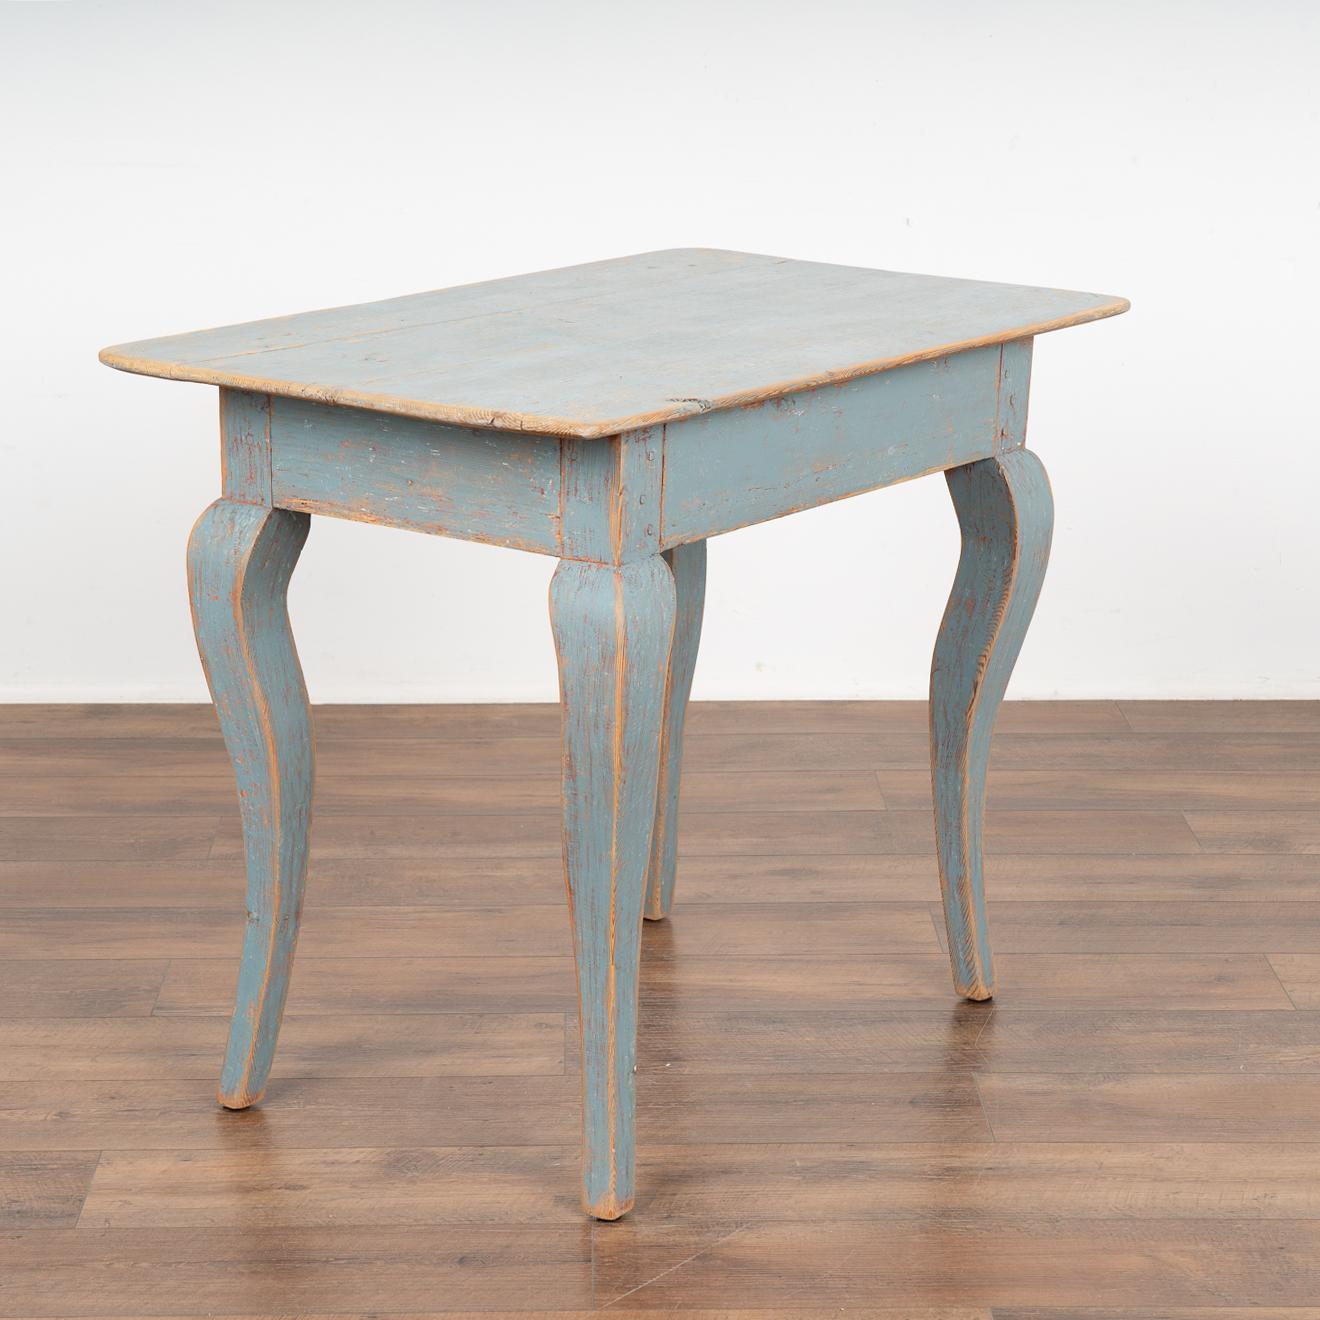 Blue Painted Pine Side Table With Cabriolet Legs, Sweden circa 1820-40 For Sale 6